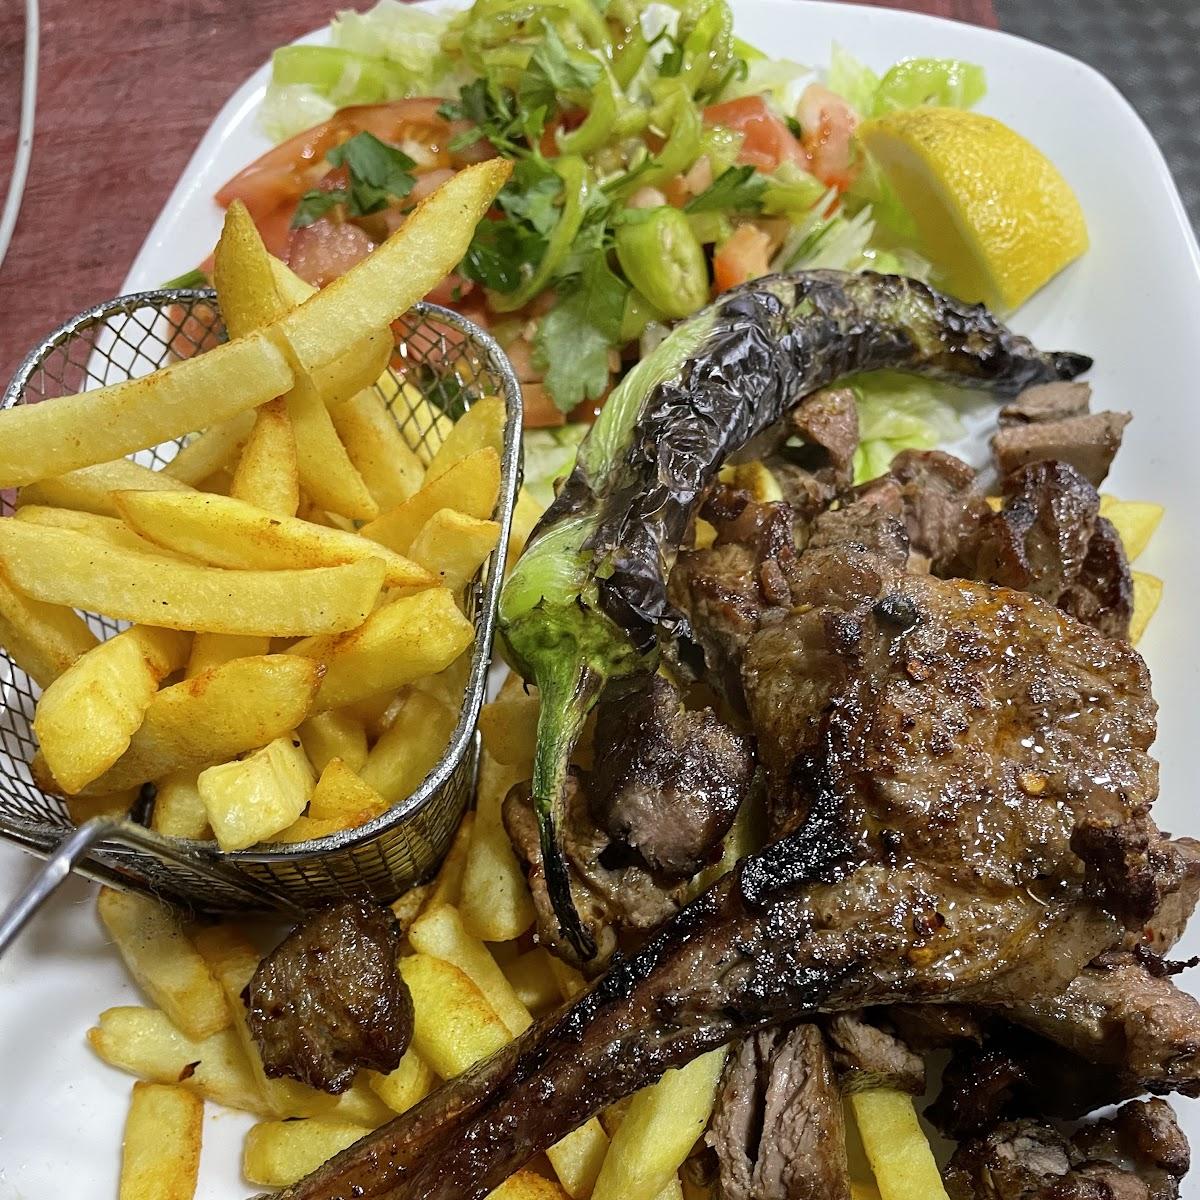 Restaurant "antep grill" in Erbach